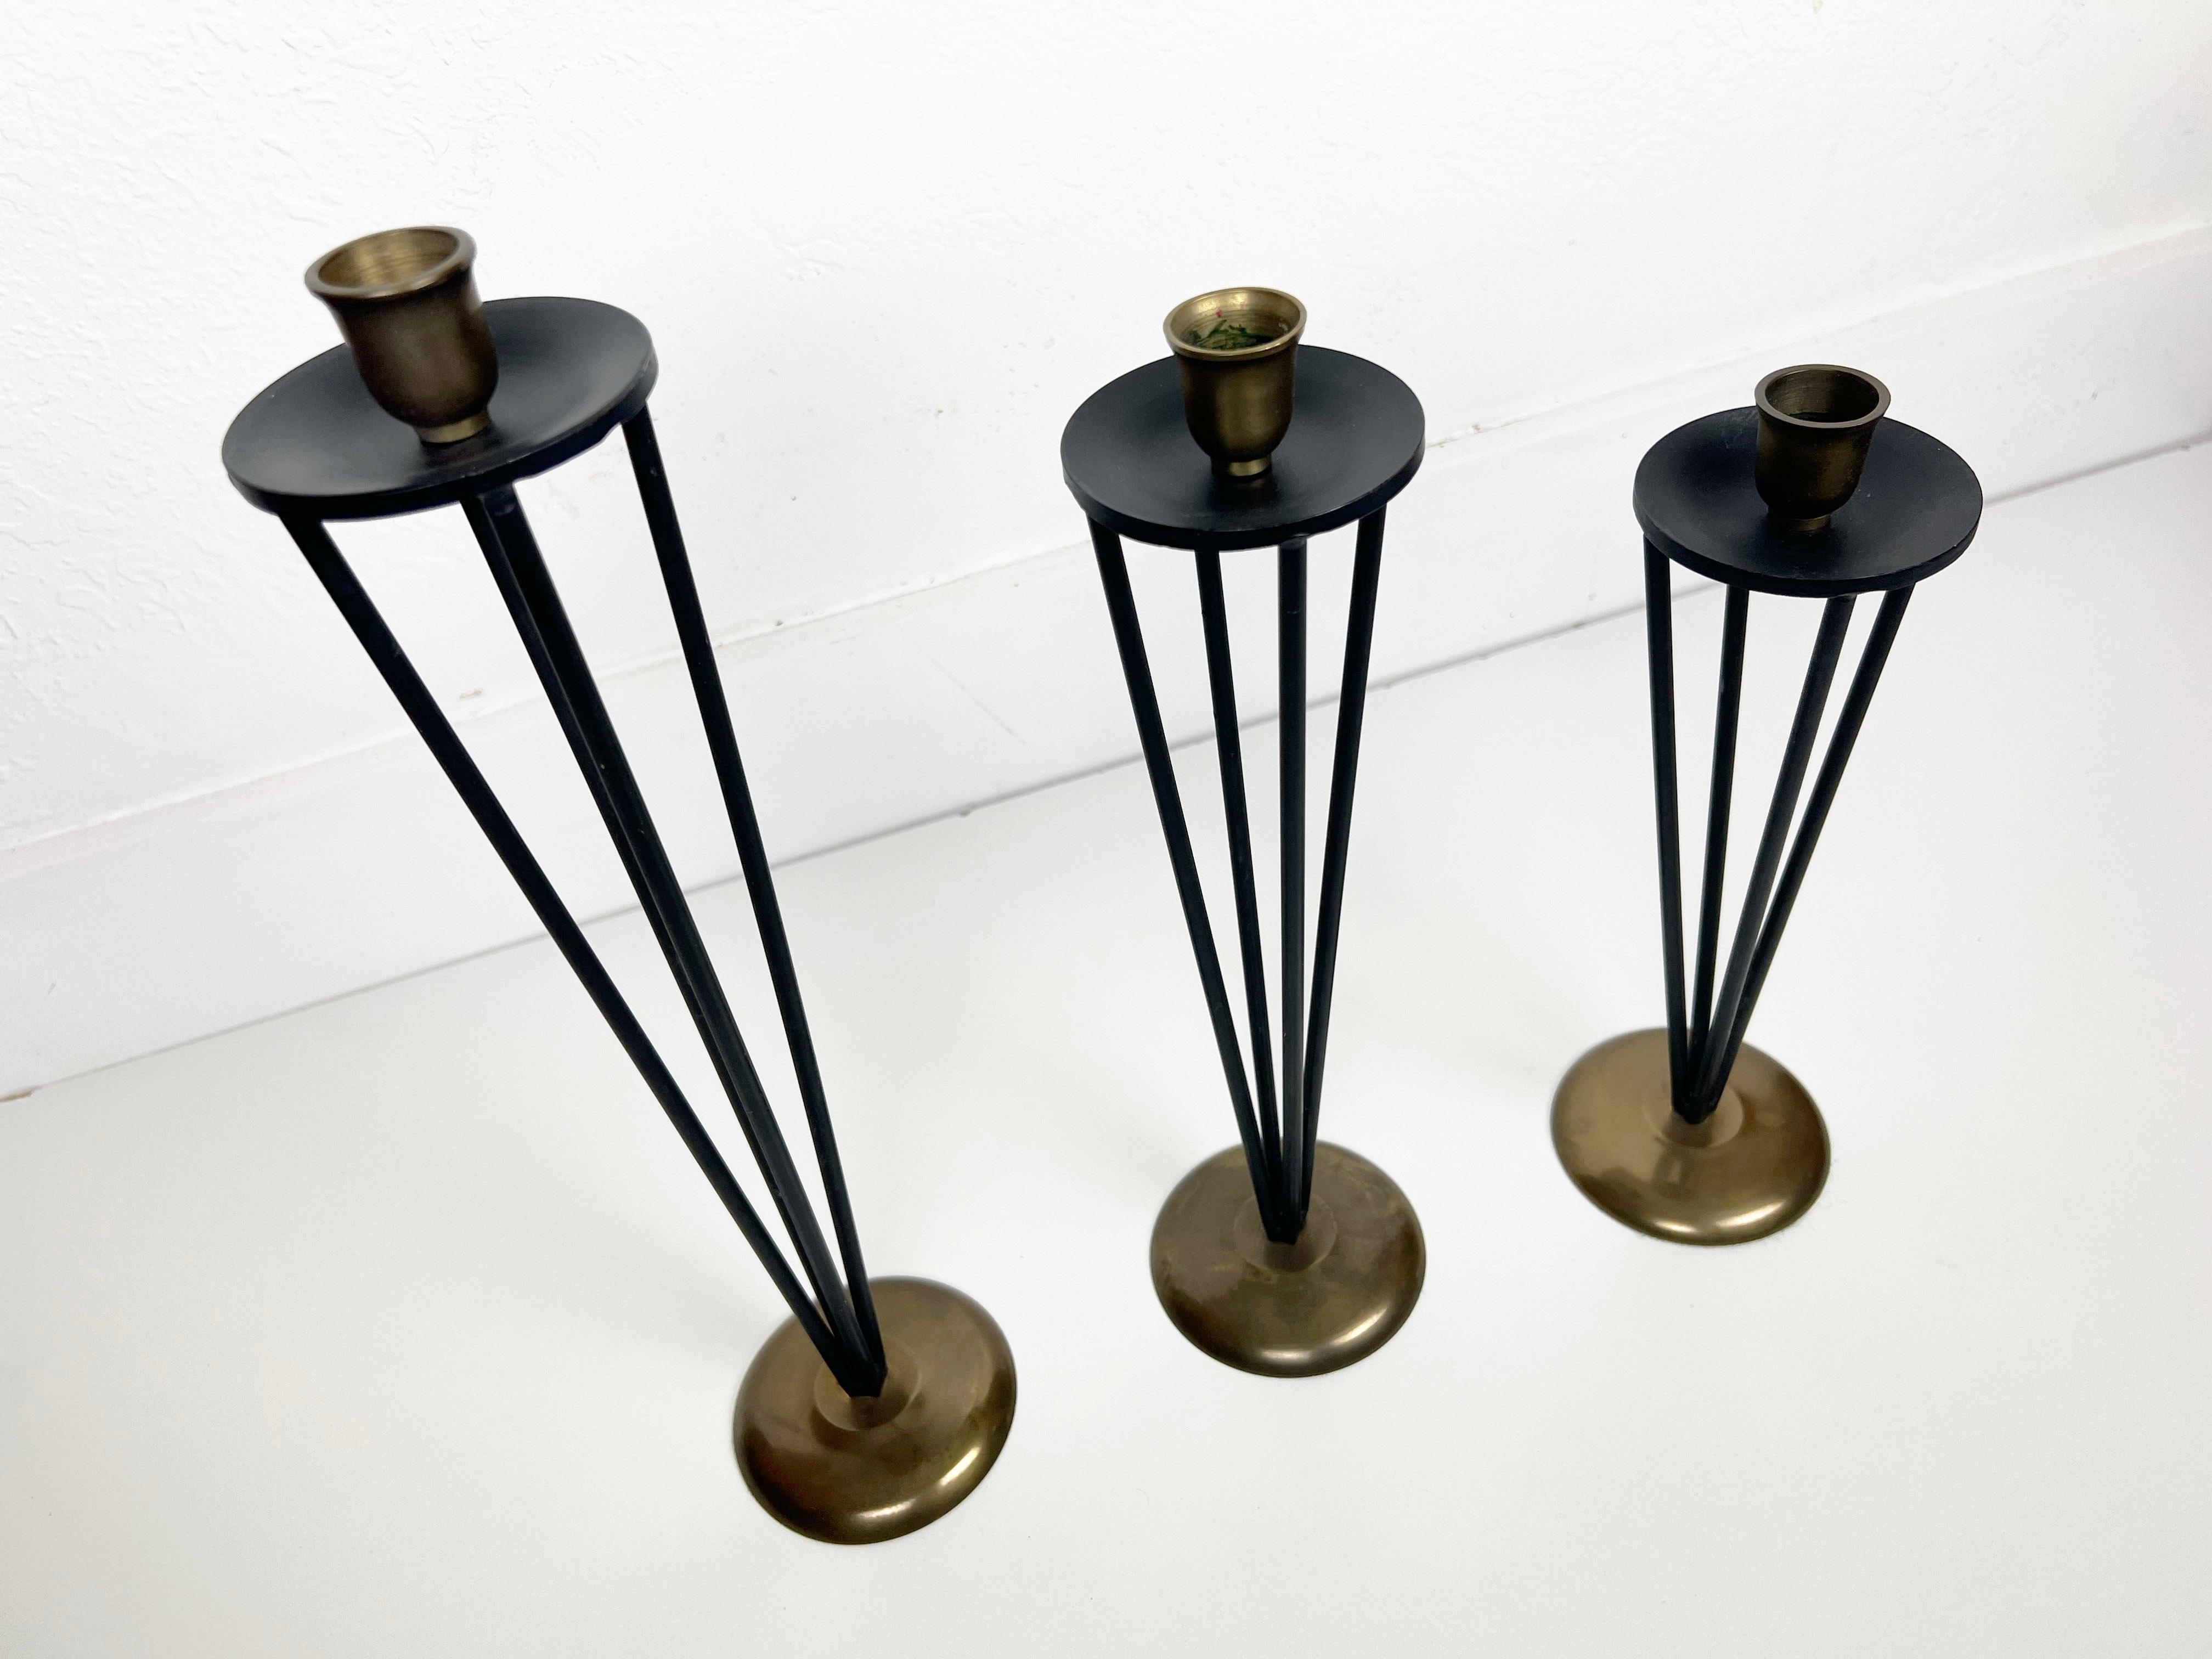 Vintage set of three black enameled metal and brass candleholders in varying size. 

Origin: USA

Year 1950-60s

Dimensions: (15